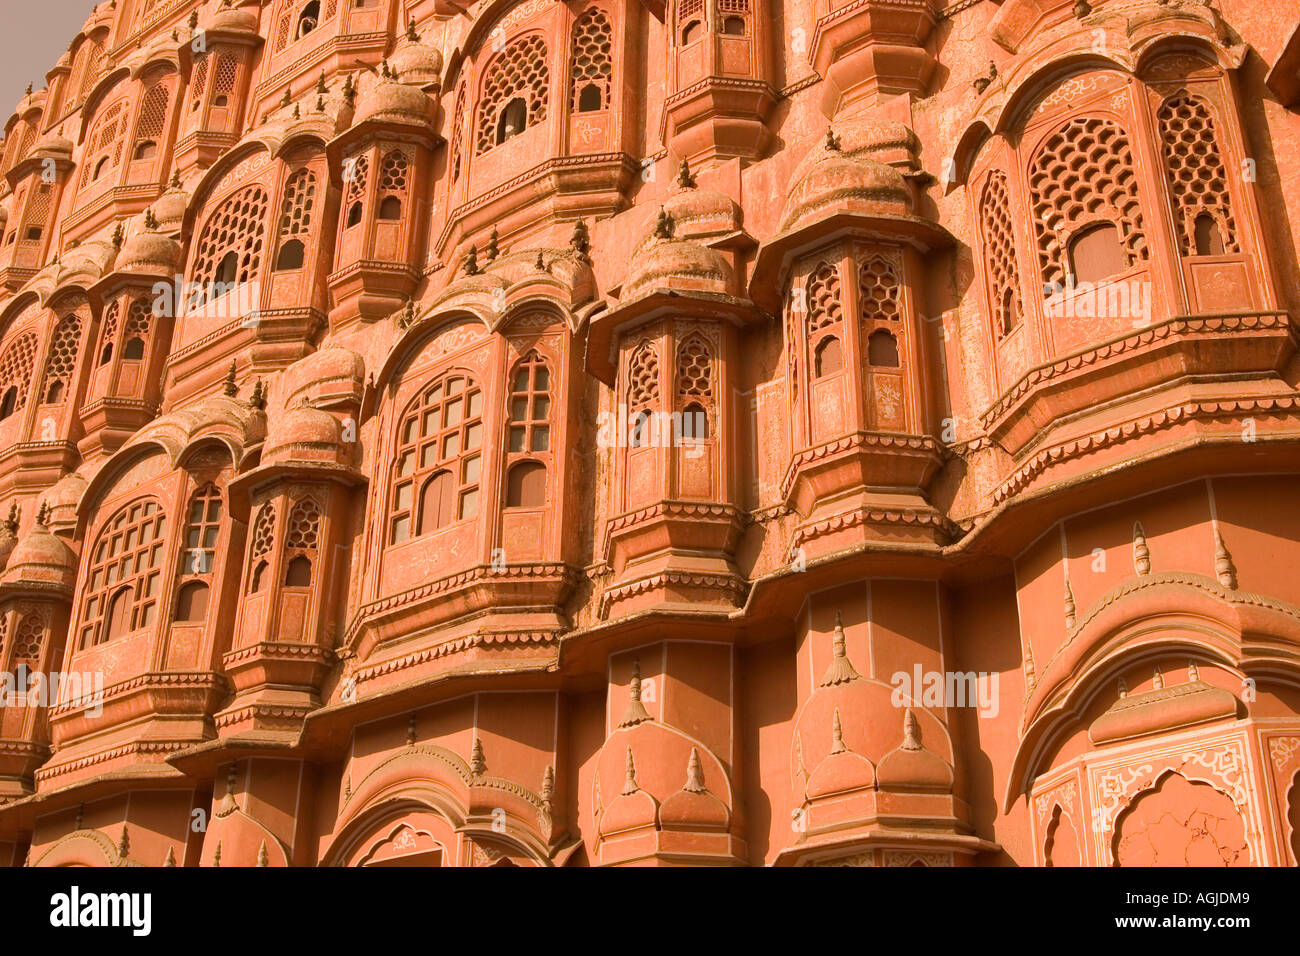 asia india palace of the winds in jaipur rajasthan Stock Photo